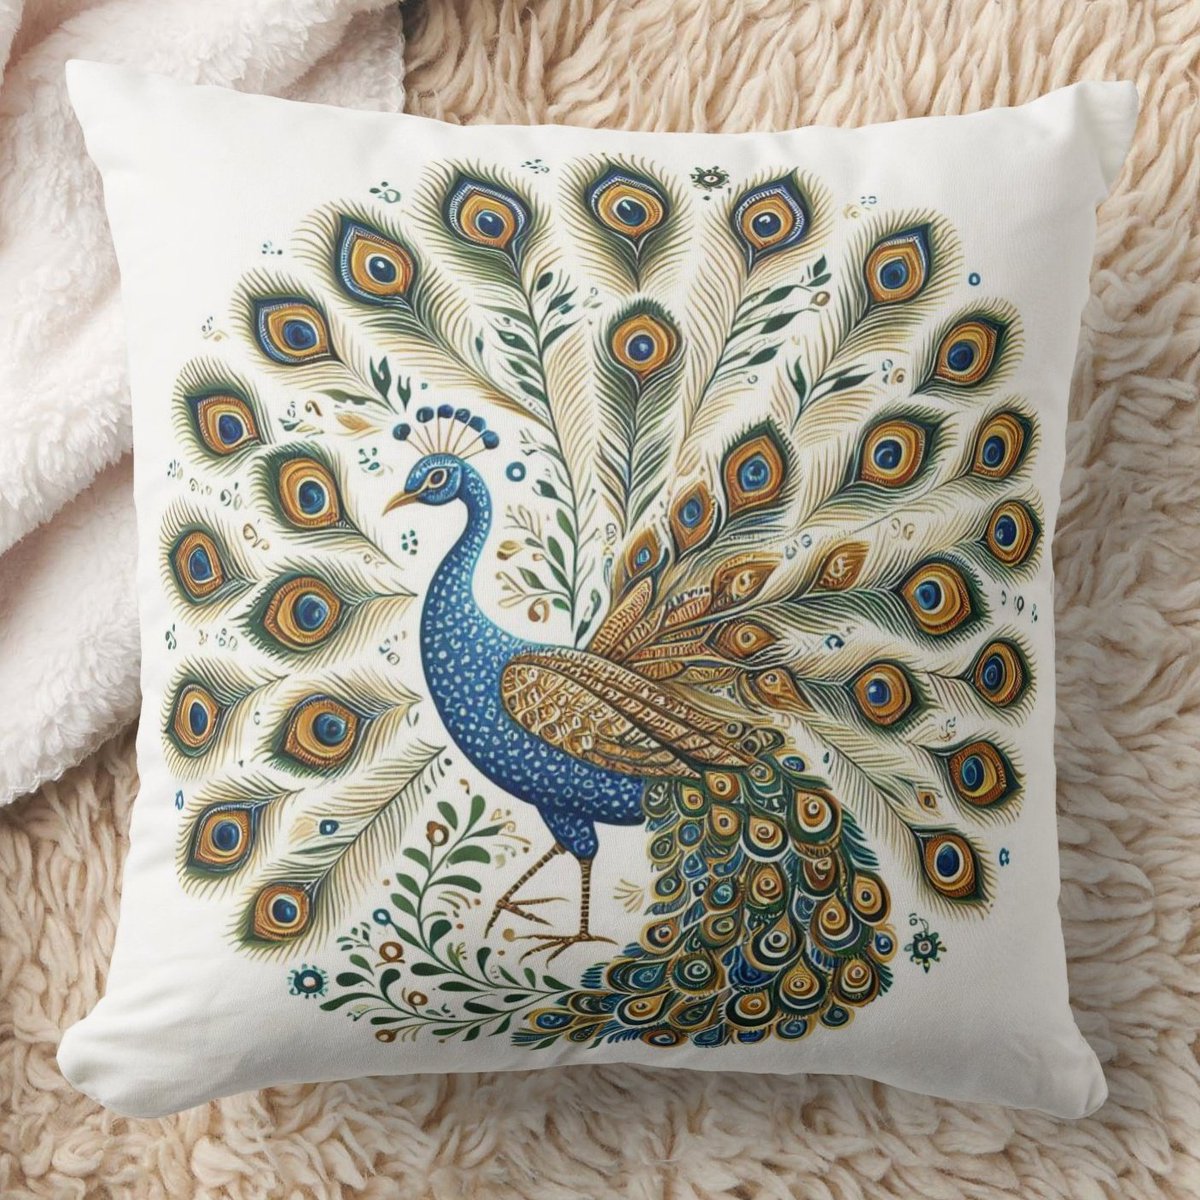 Peacock Feathers Fanning Throw #Pillow zazzle.com/peacock_feathe… / @zazzle #pillows #ThrowPillow #personalized #Personalization #custompillow #personalizedpillow #uniquehome #personalisedgifts #personalizedgifts #peacock #modernhome #weekendvibes Good Friday Night, Saturday Morning